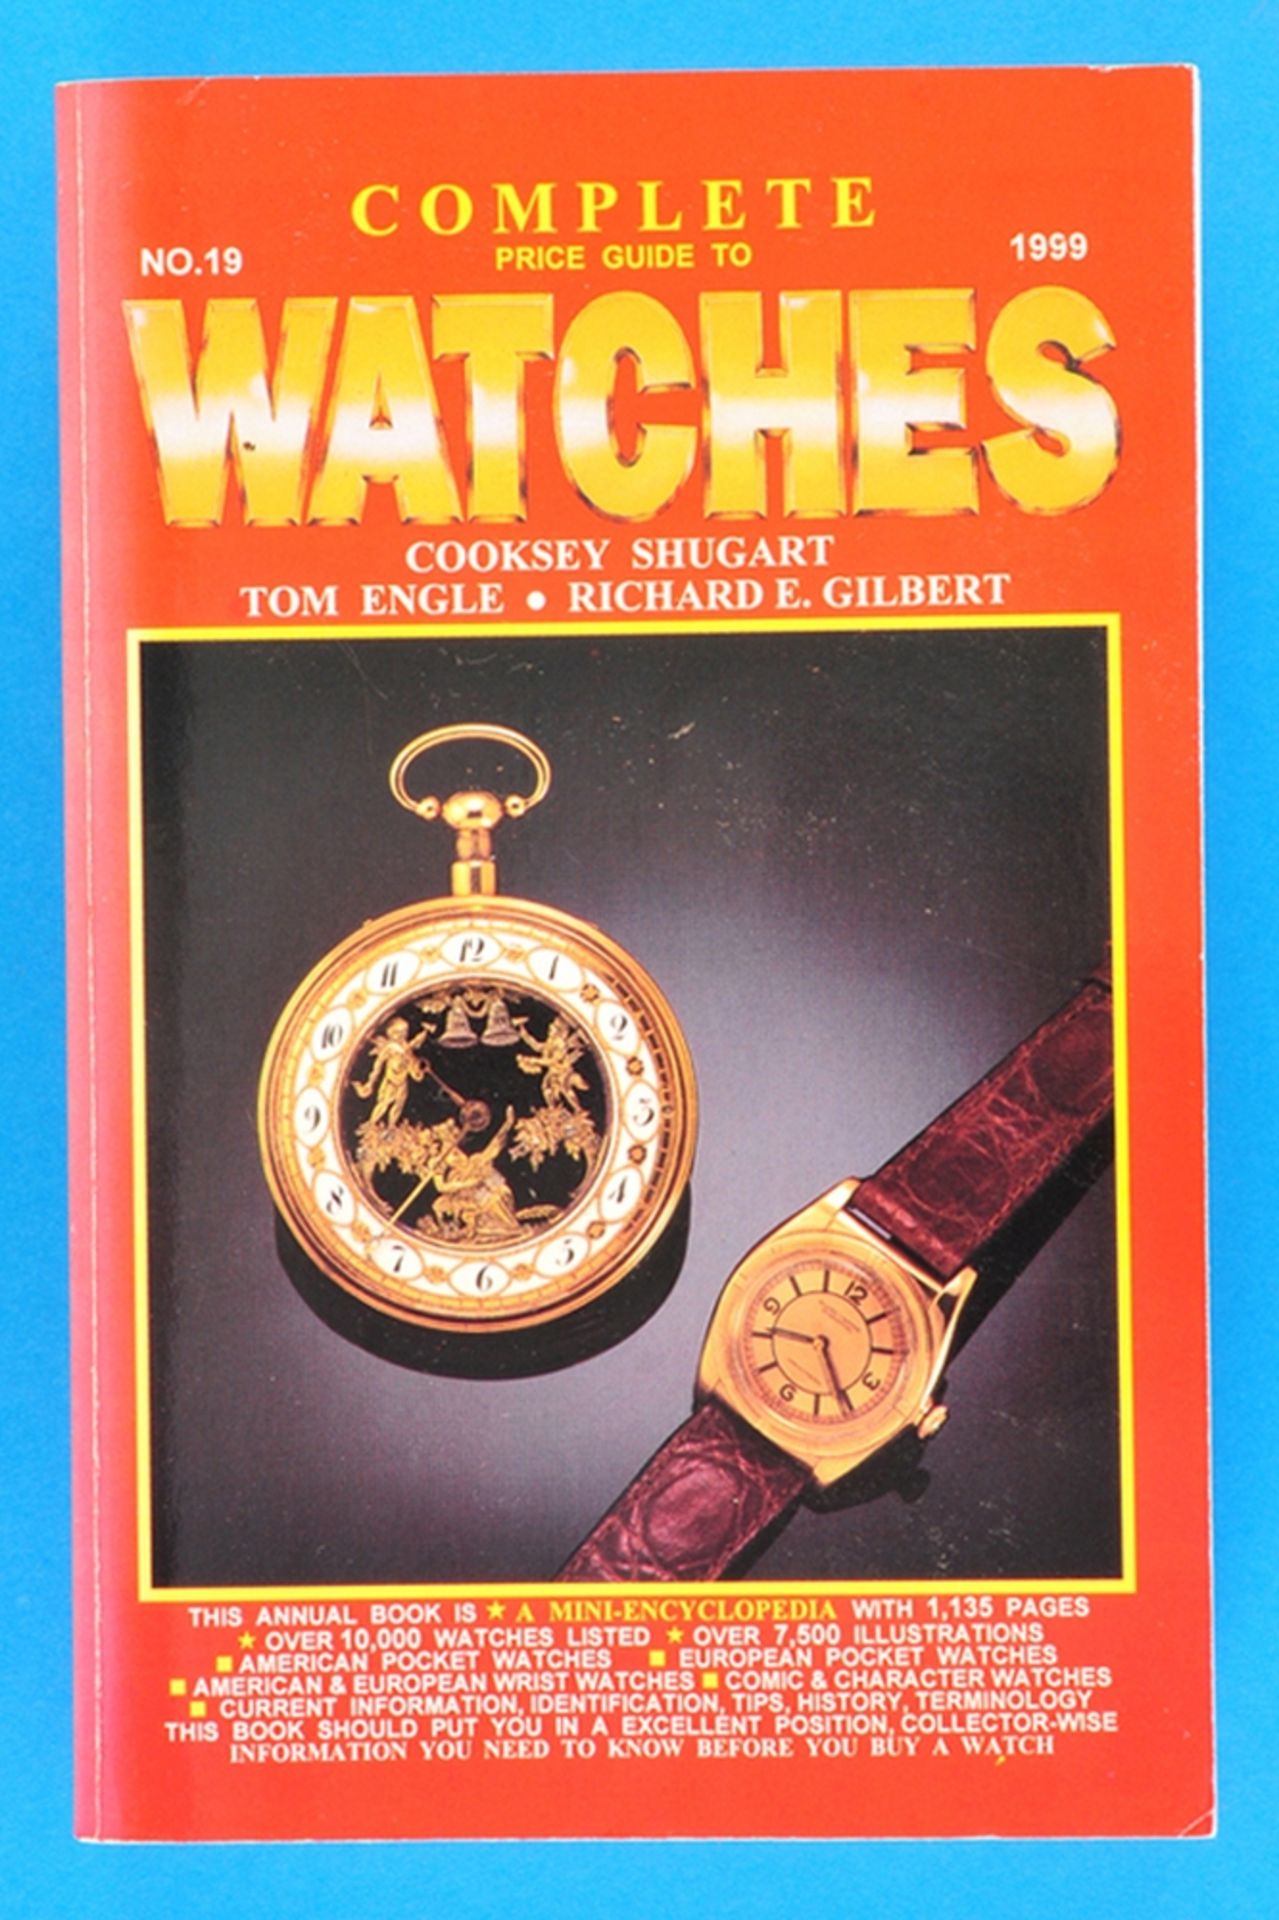 Complete Price Guide to Watches, 1999